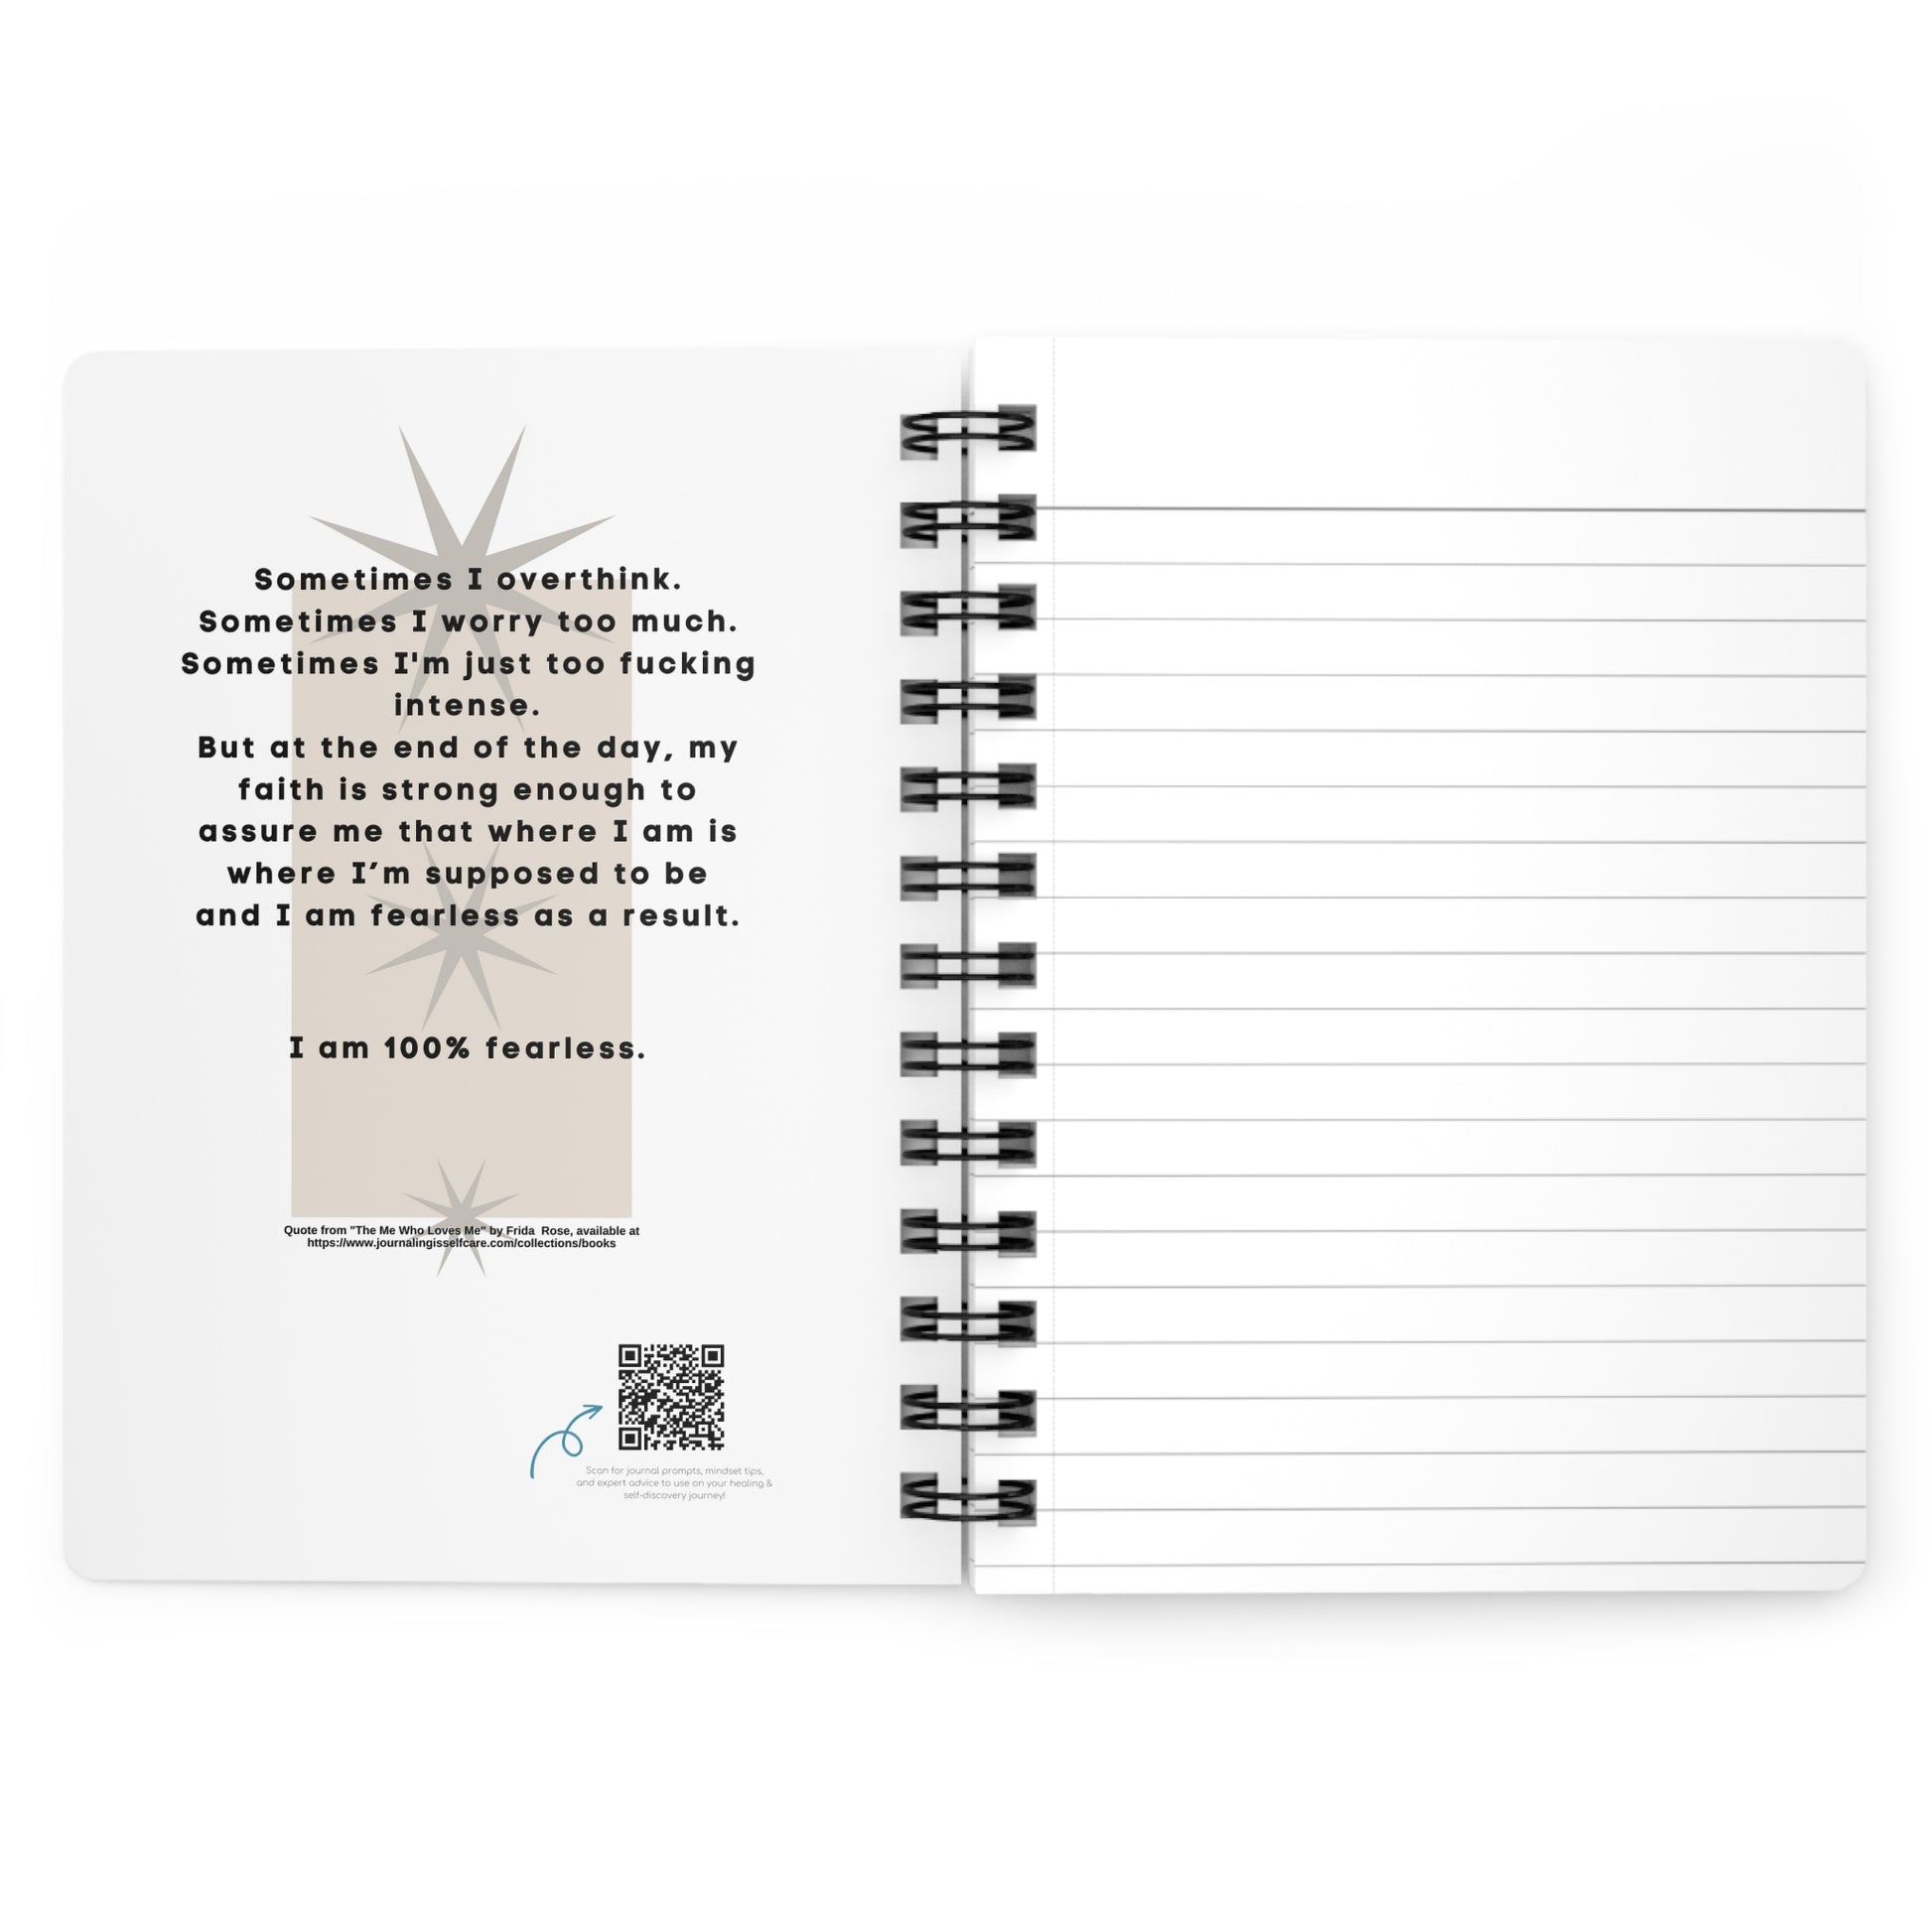 A "Blessed" Prayer Journal For Women with a quote on it designed for women's empowerment. Perfect size (6x9 inches) to fit in your bag or purse for on-the-go use. 120 pages